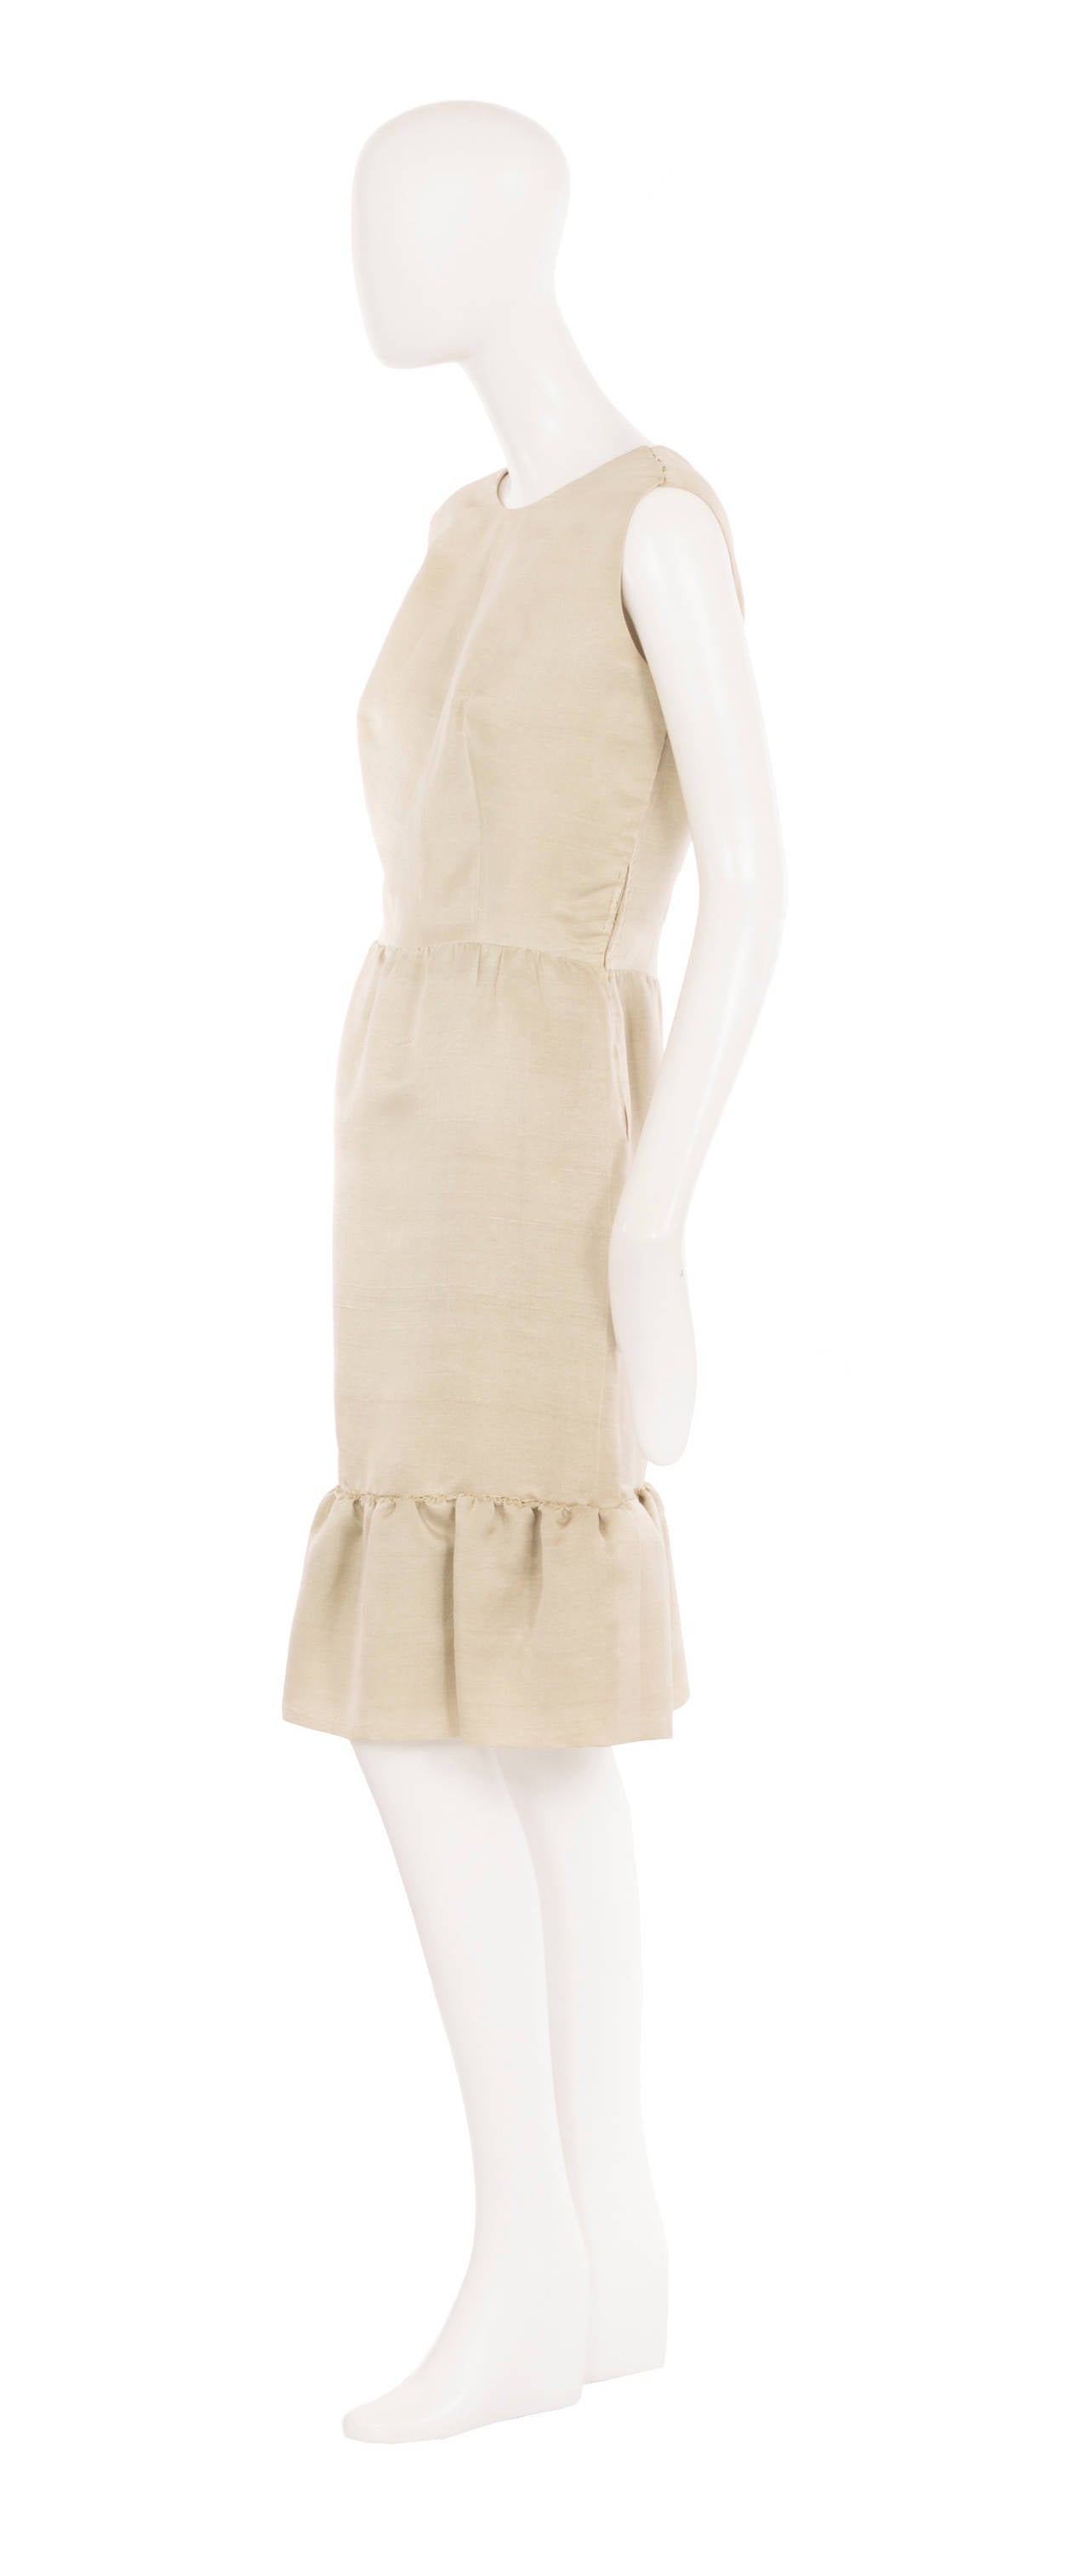 This beautifully constructed haute couture cocktail dress was designed by Balenciaga for his Spanish label Eisa. Made of a pearlescent oyster-coloured silk that has a subtle shimmer, the dress features a round neckline, scooping lower to the back,